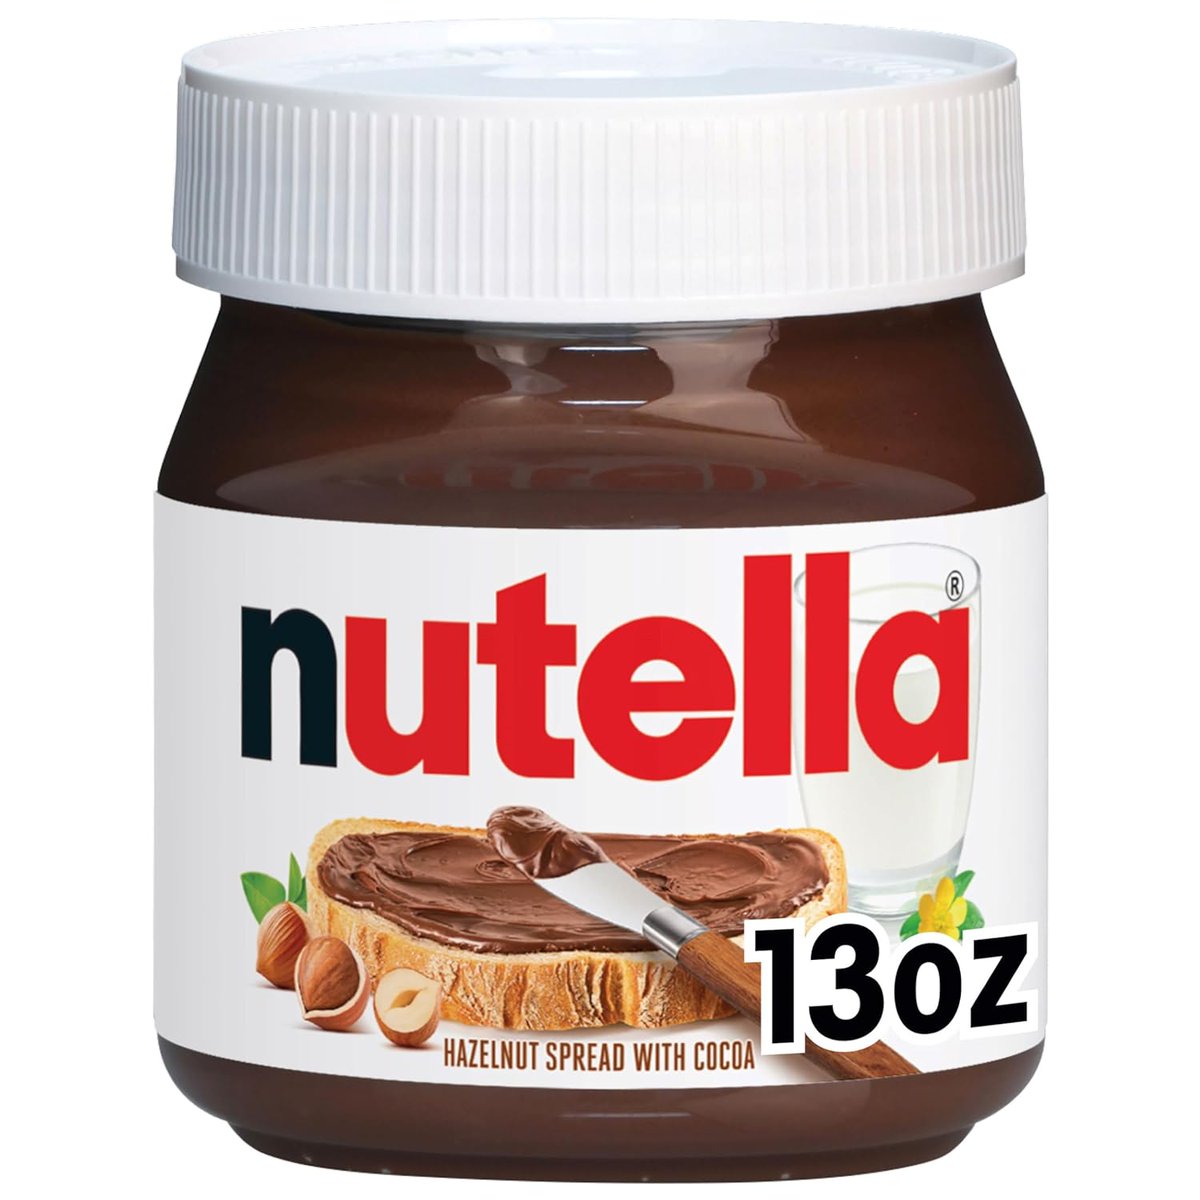 Nutella Hazelnut Spread With Cocoa (13 oz jar) is on sale at Amazon for $2.99 zdcs.link/jdYR2 Sweet deal 😎